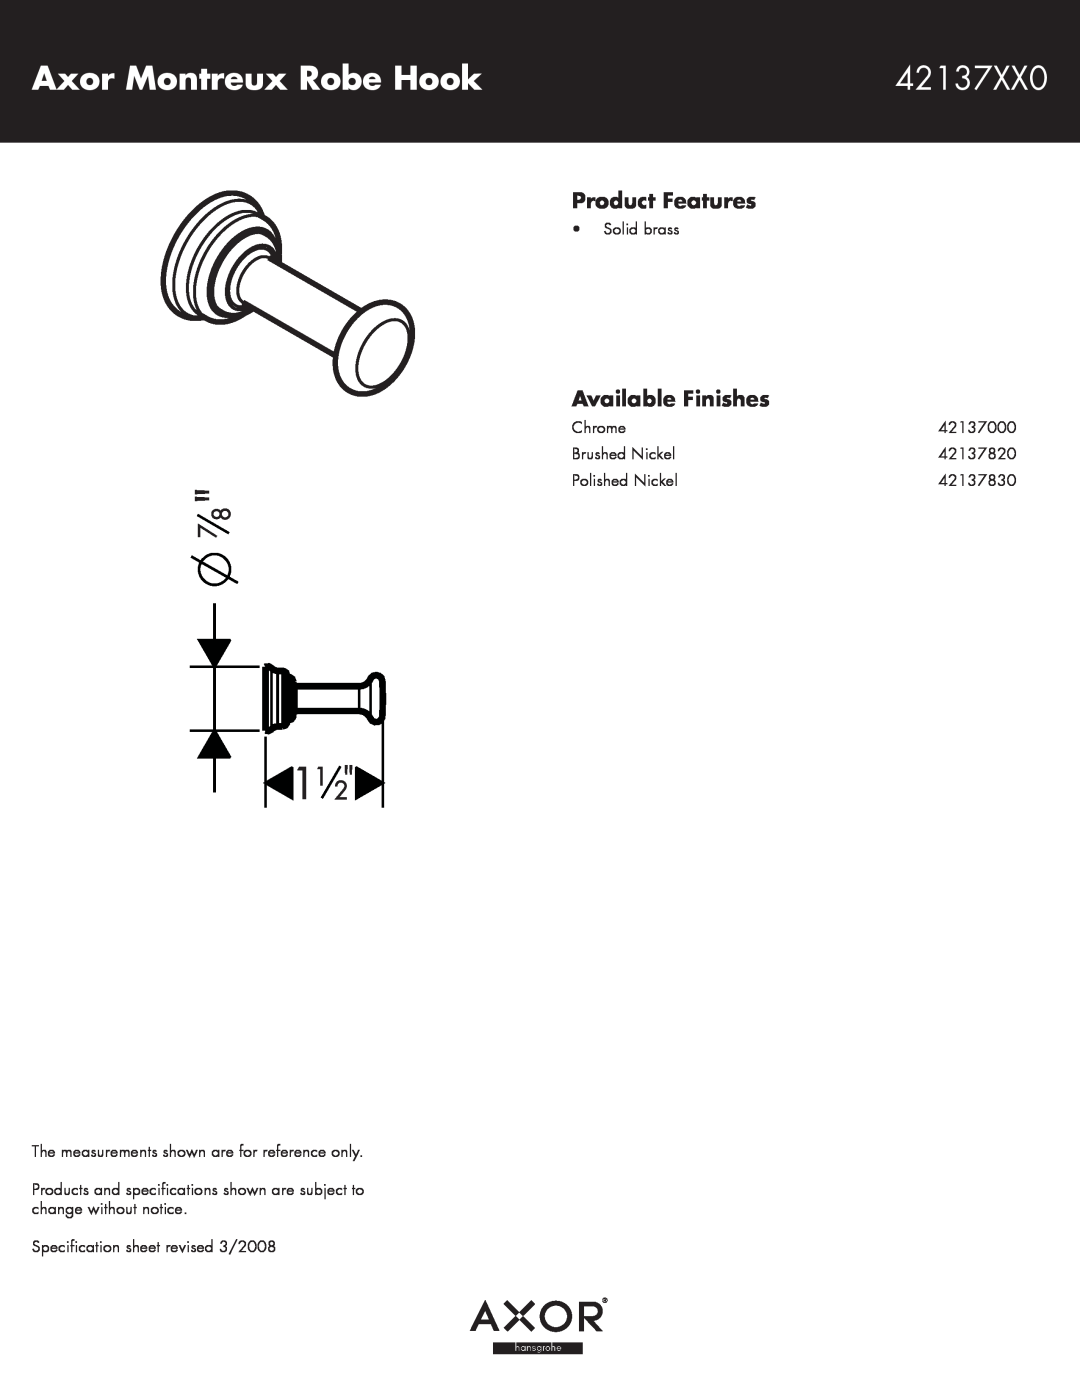 Axor 42137XX0 specifications Axor Montreux Robe Hook, Product Features, Available Finishes 